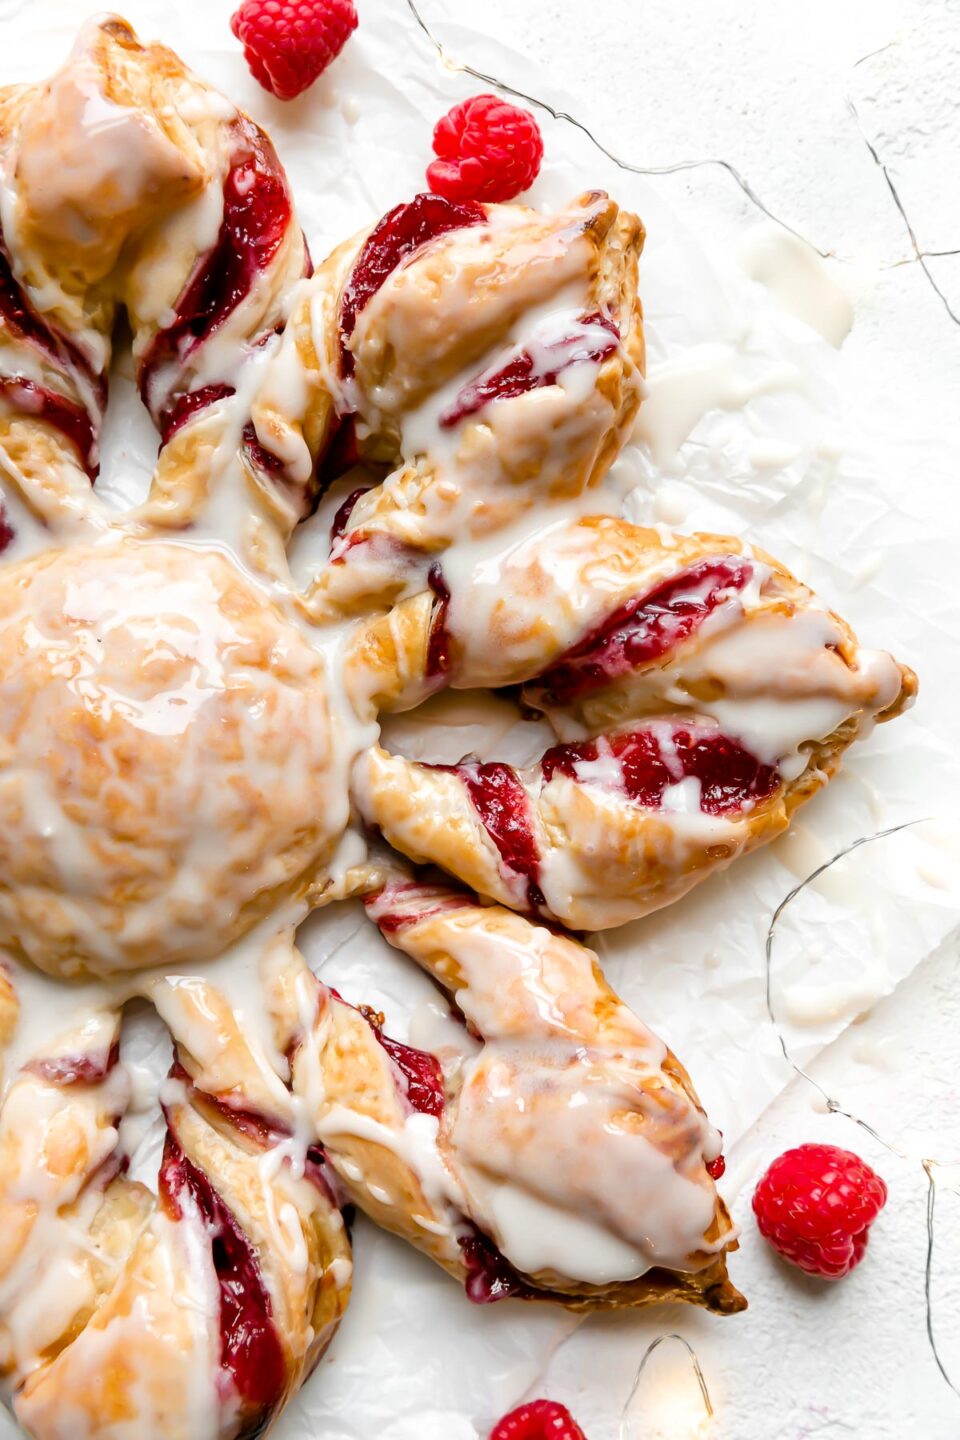 A Christmas Kringle Puff Pastry Star sits atop a piece of parchment paper. A string of twinkling lights and fresh raspberries surround the pastry. The pastry sits atop a creamy white textured surface.